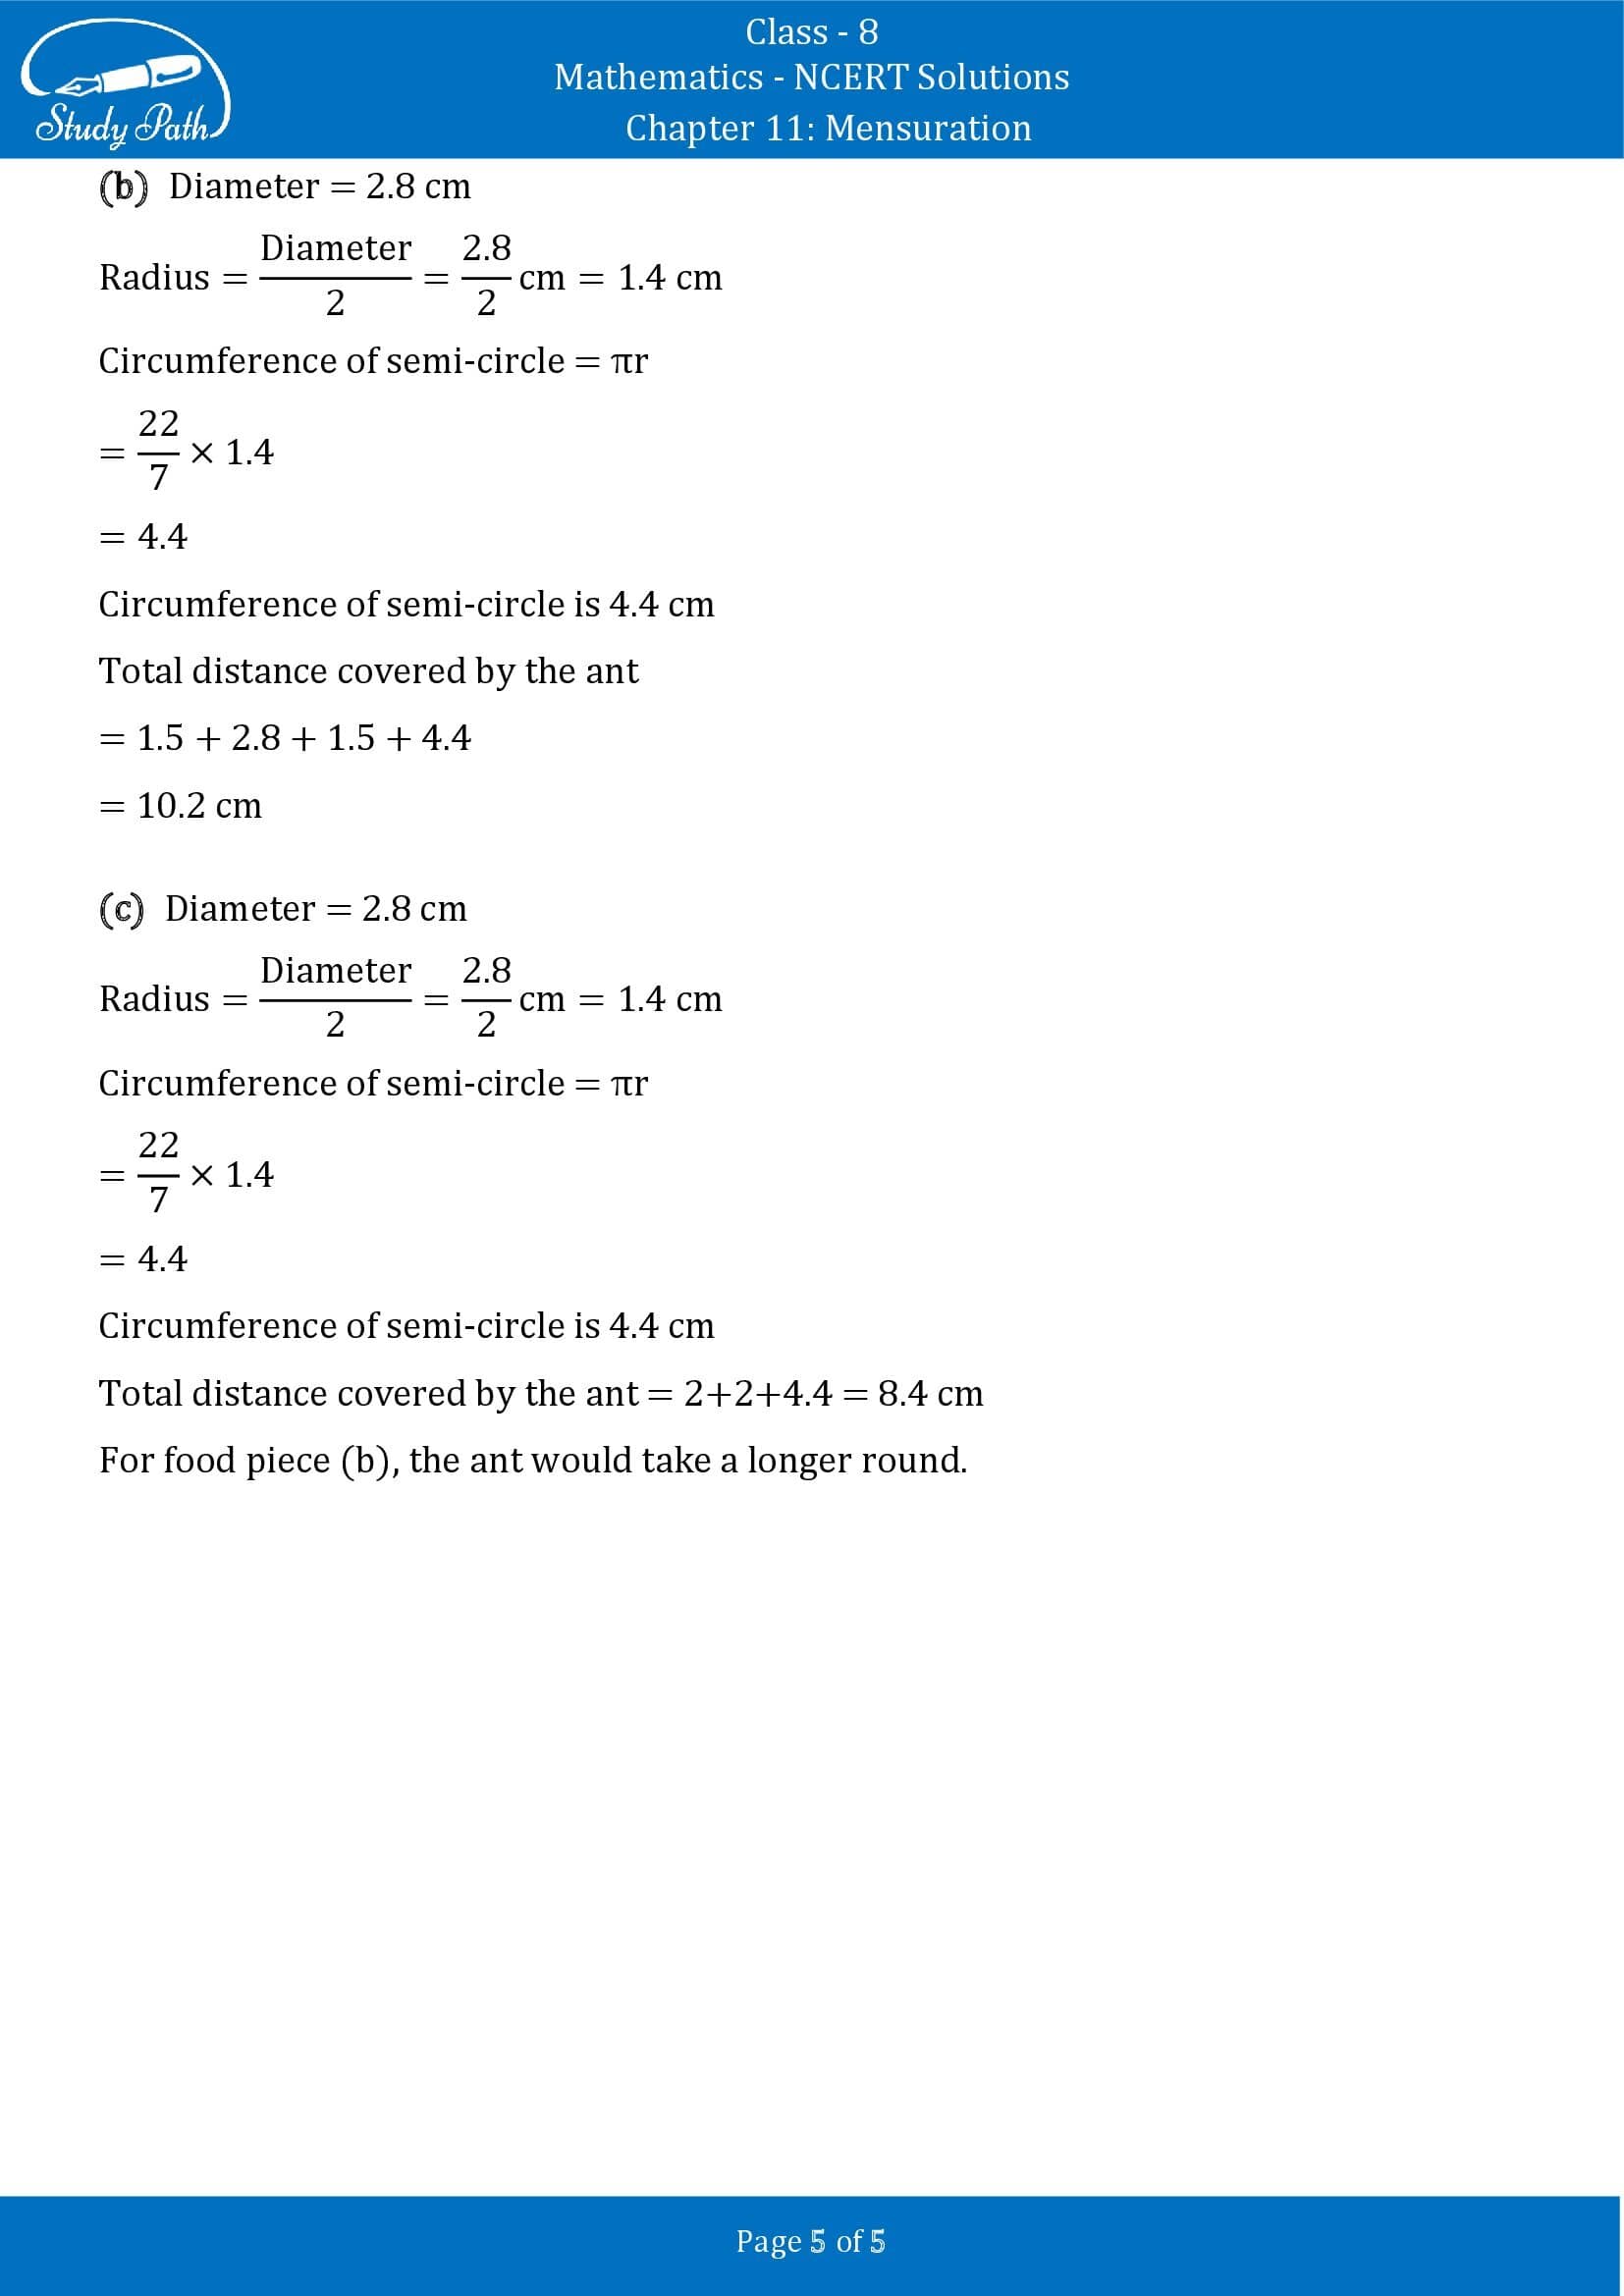 NCERT Solutions for Class 8 Maths Chapter 11 Mensuration Exercise 11.1 00005